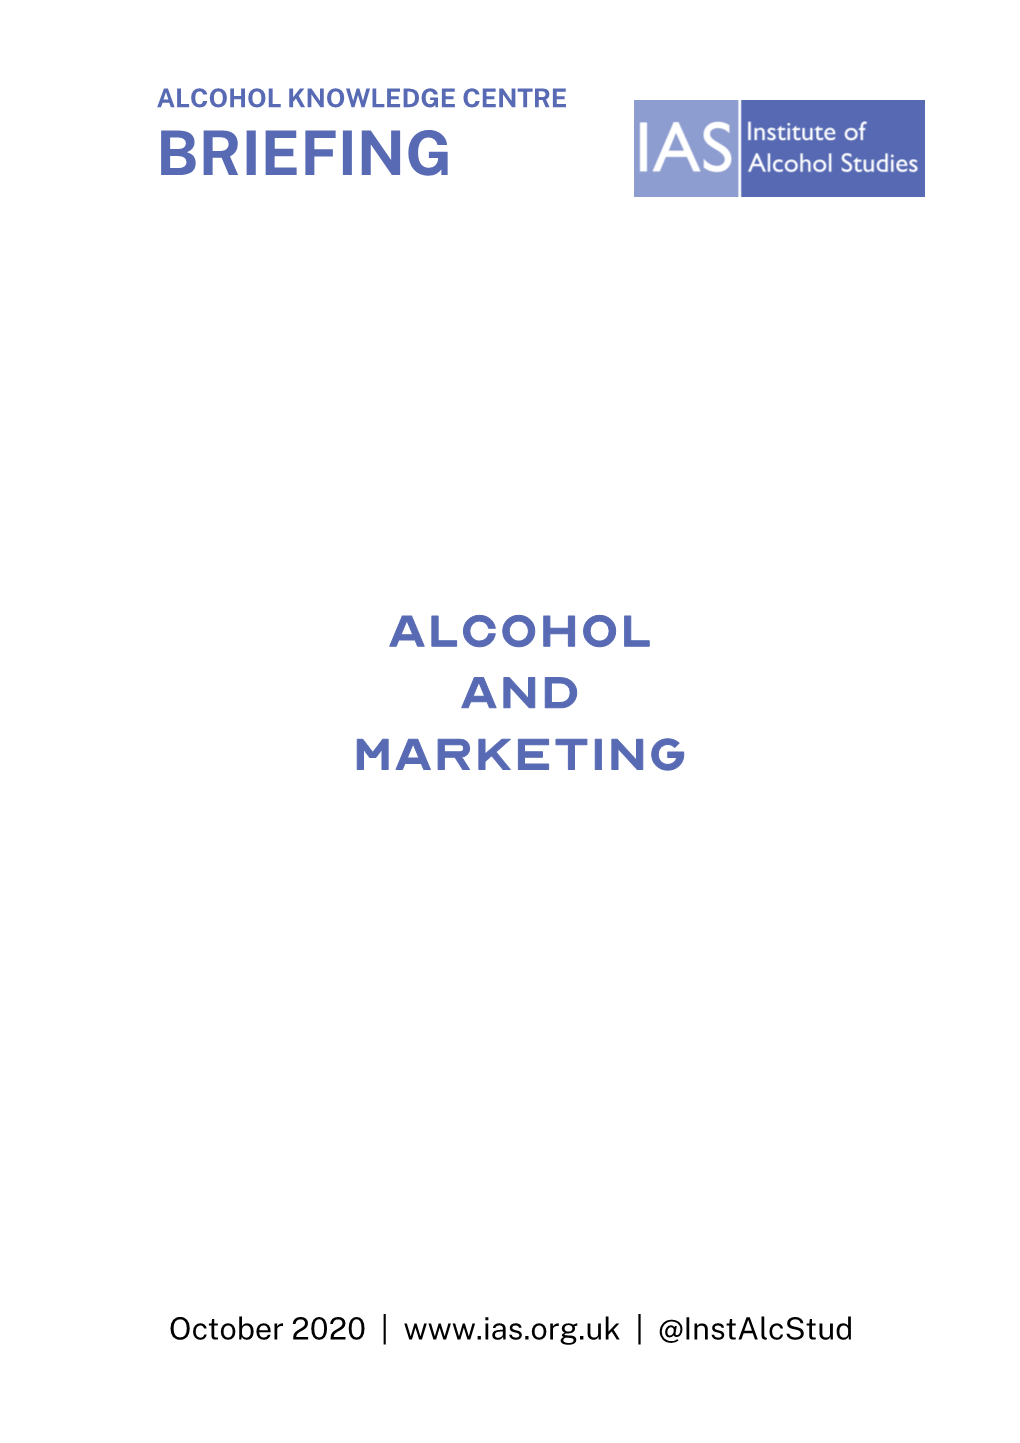 Alcohol and Marketing